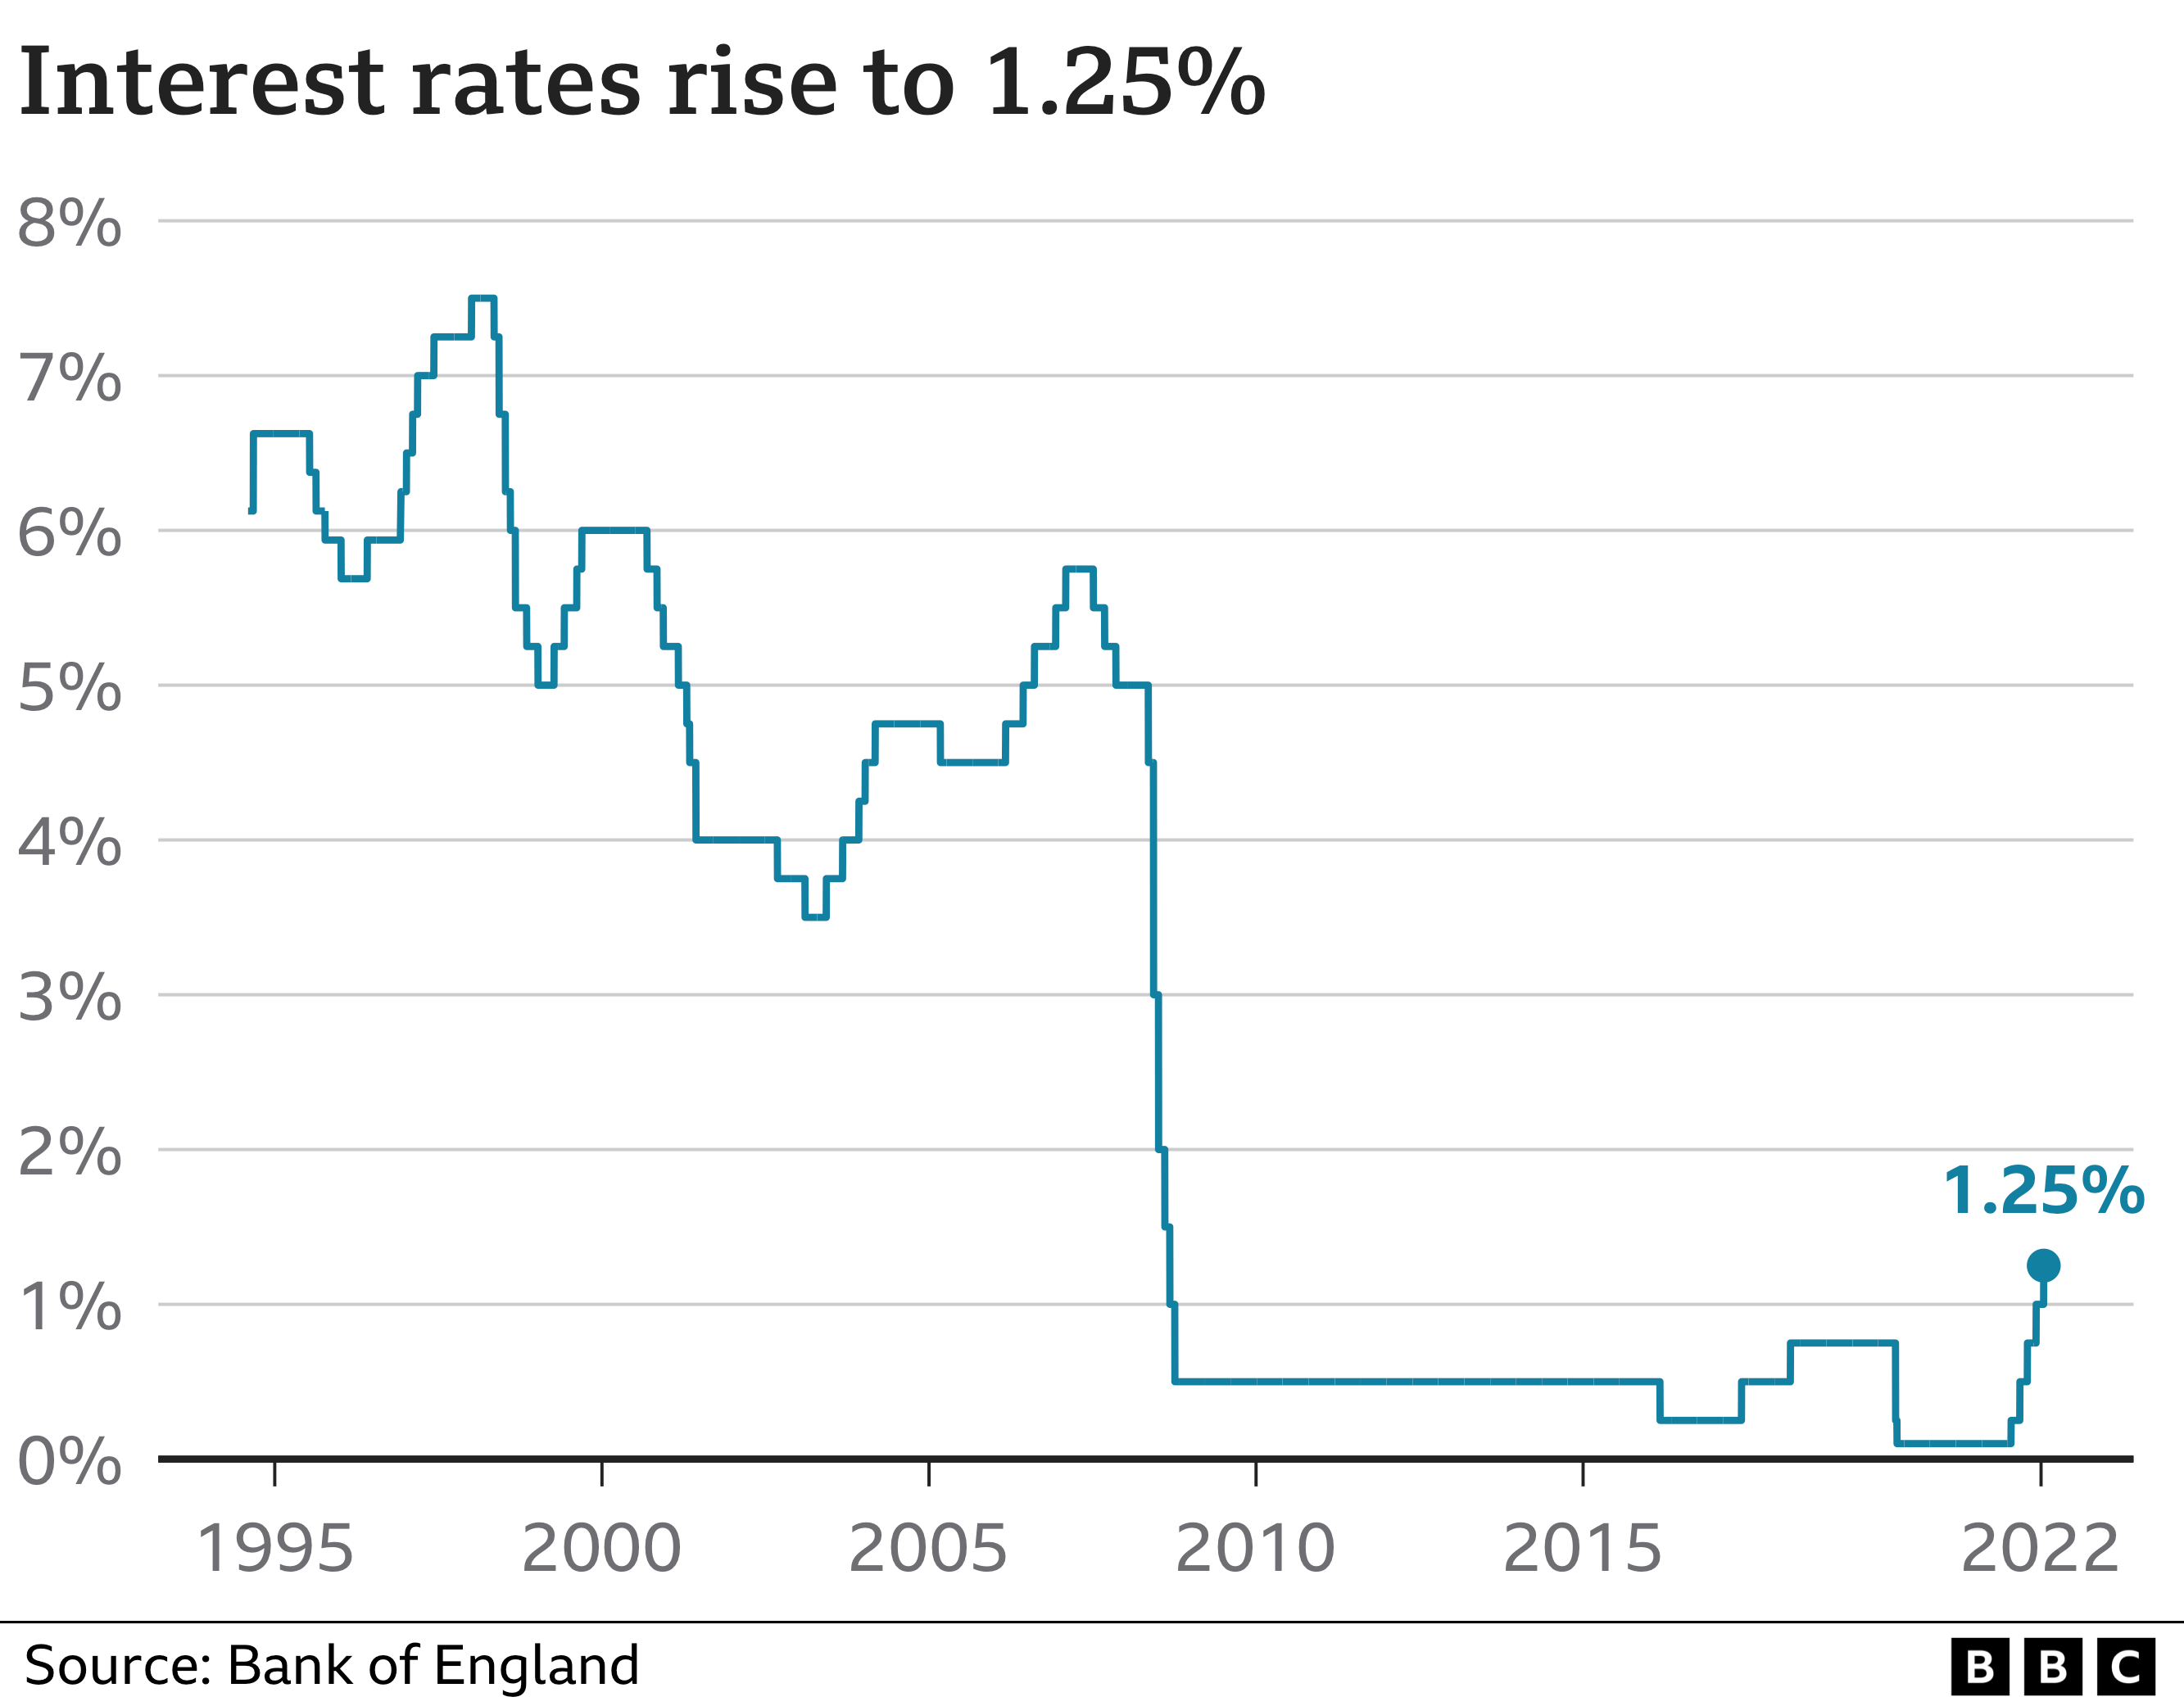 Graph showing interest rates rise to 1.25%